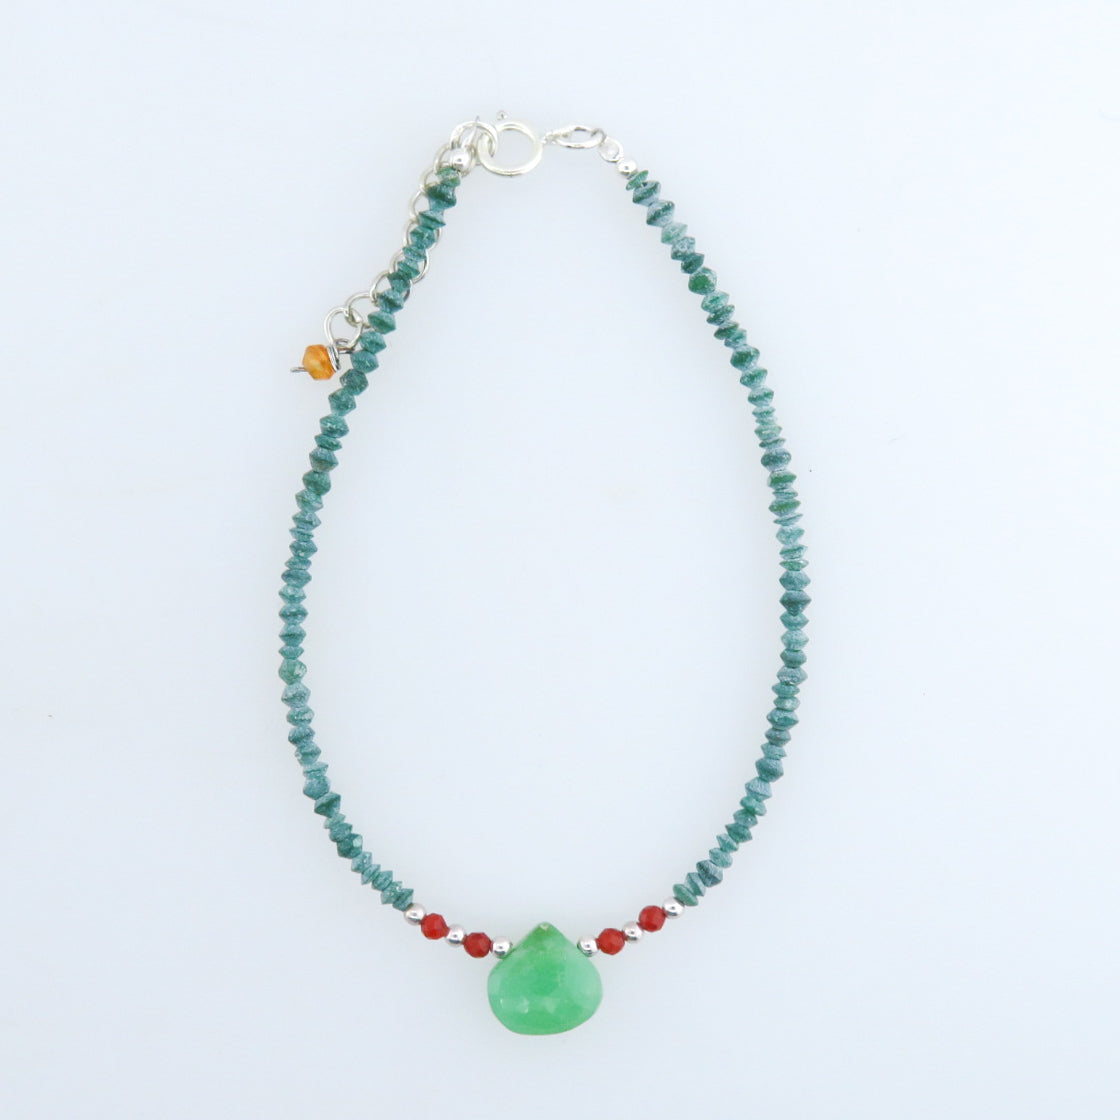 Emerald Bracelet with Chrysoprase, Carnelian and Silver Beads